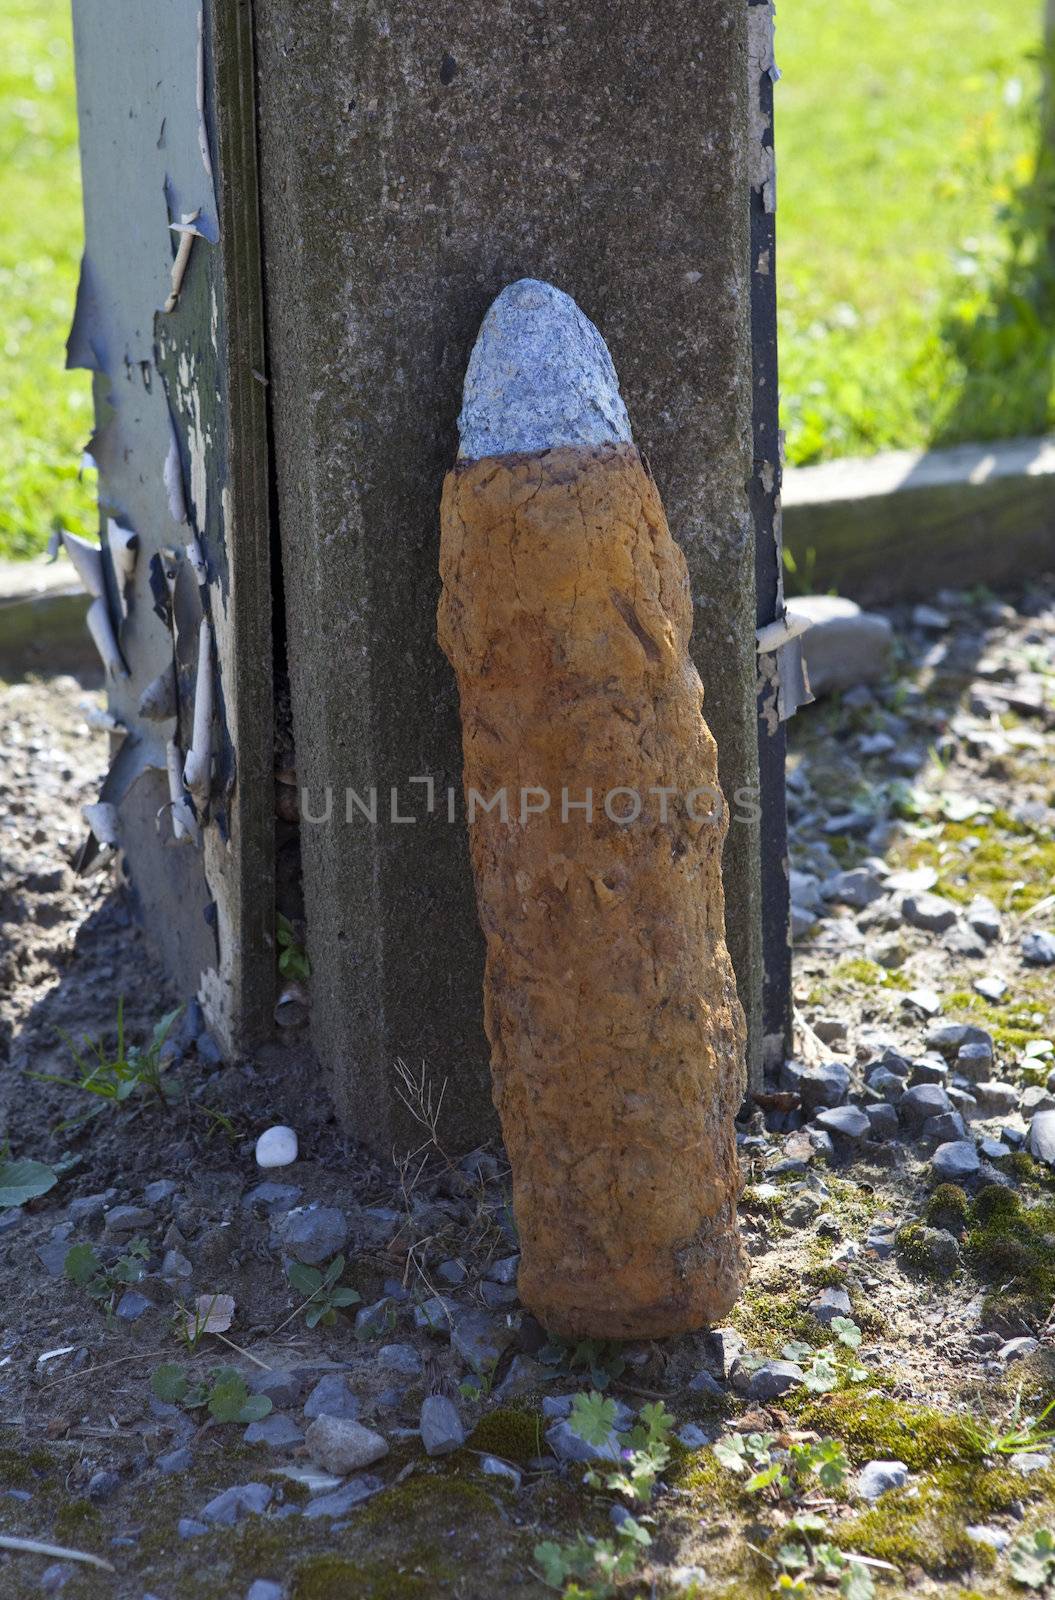 Unexploded Shell from the Great War in Ypres by chrisdorney